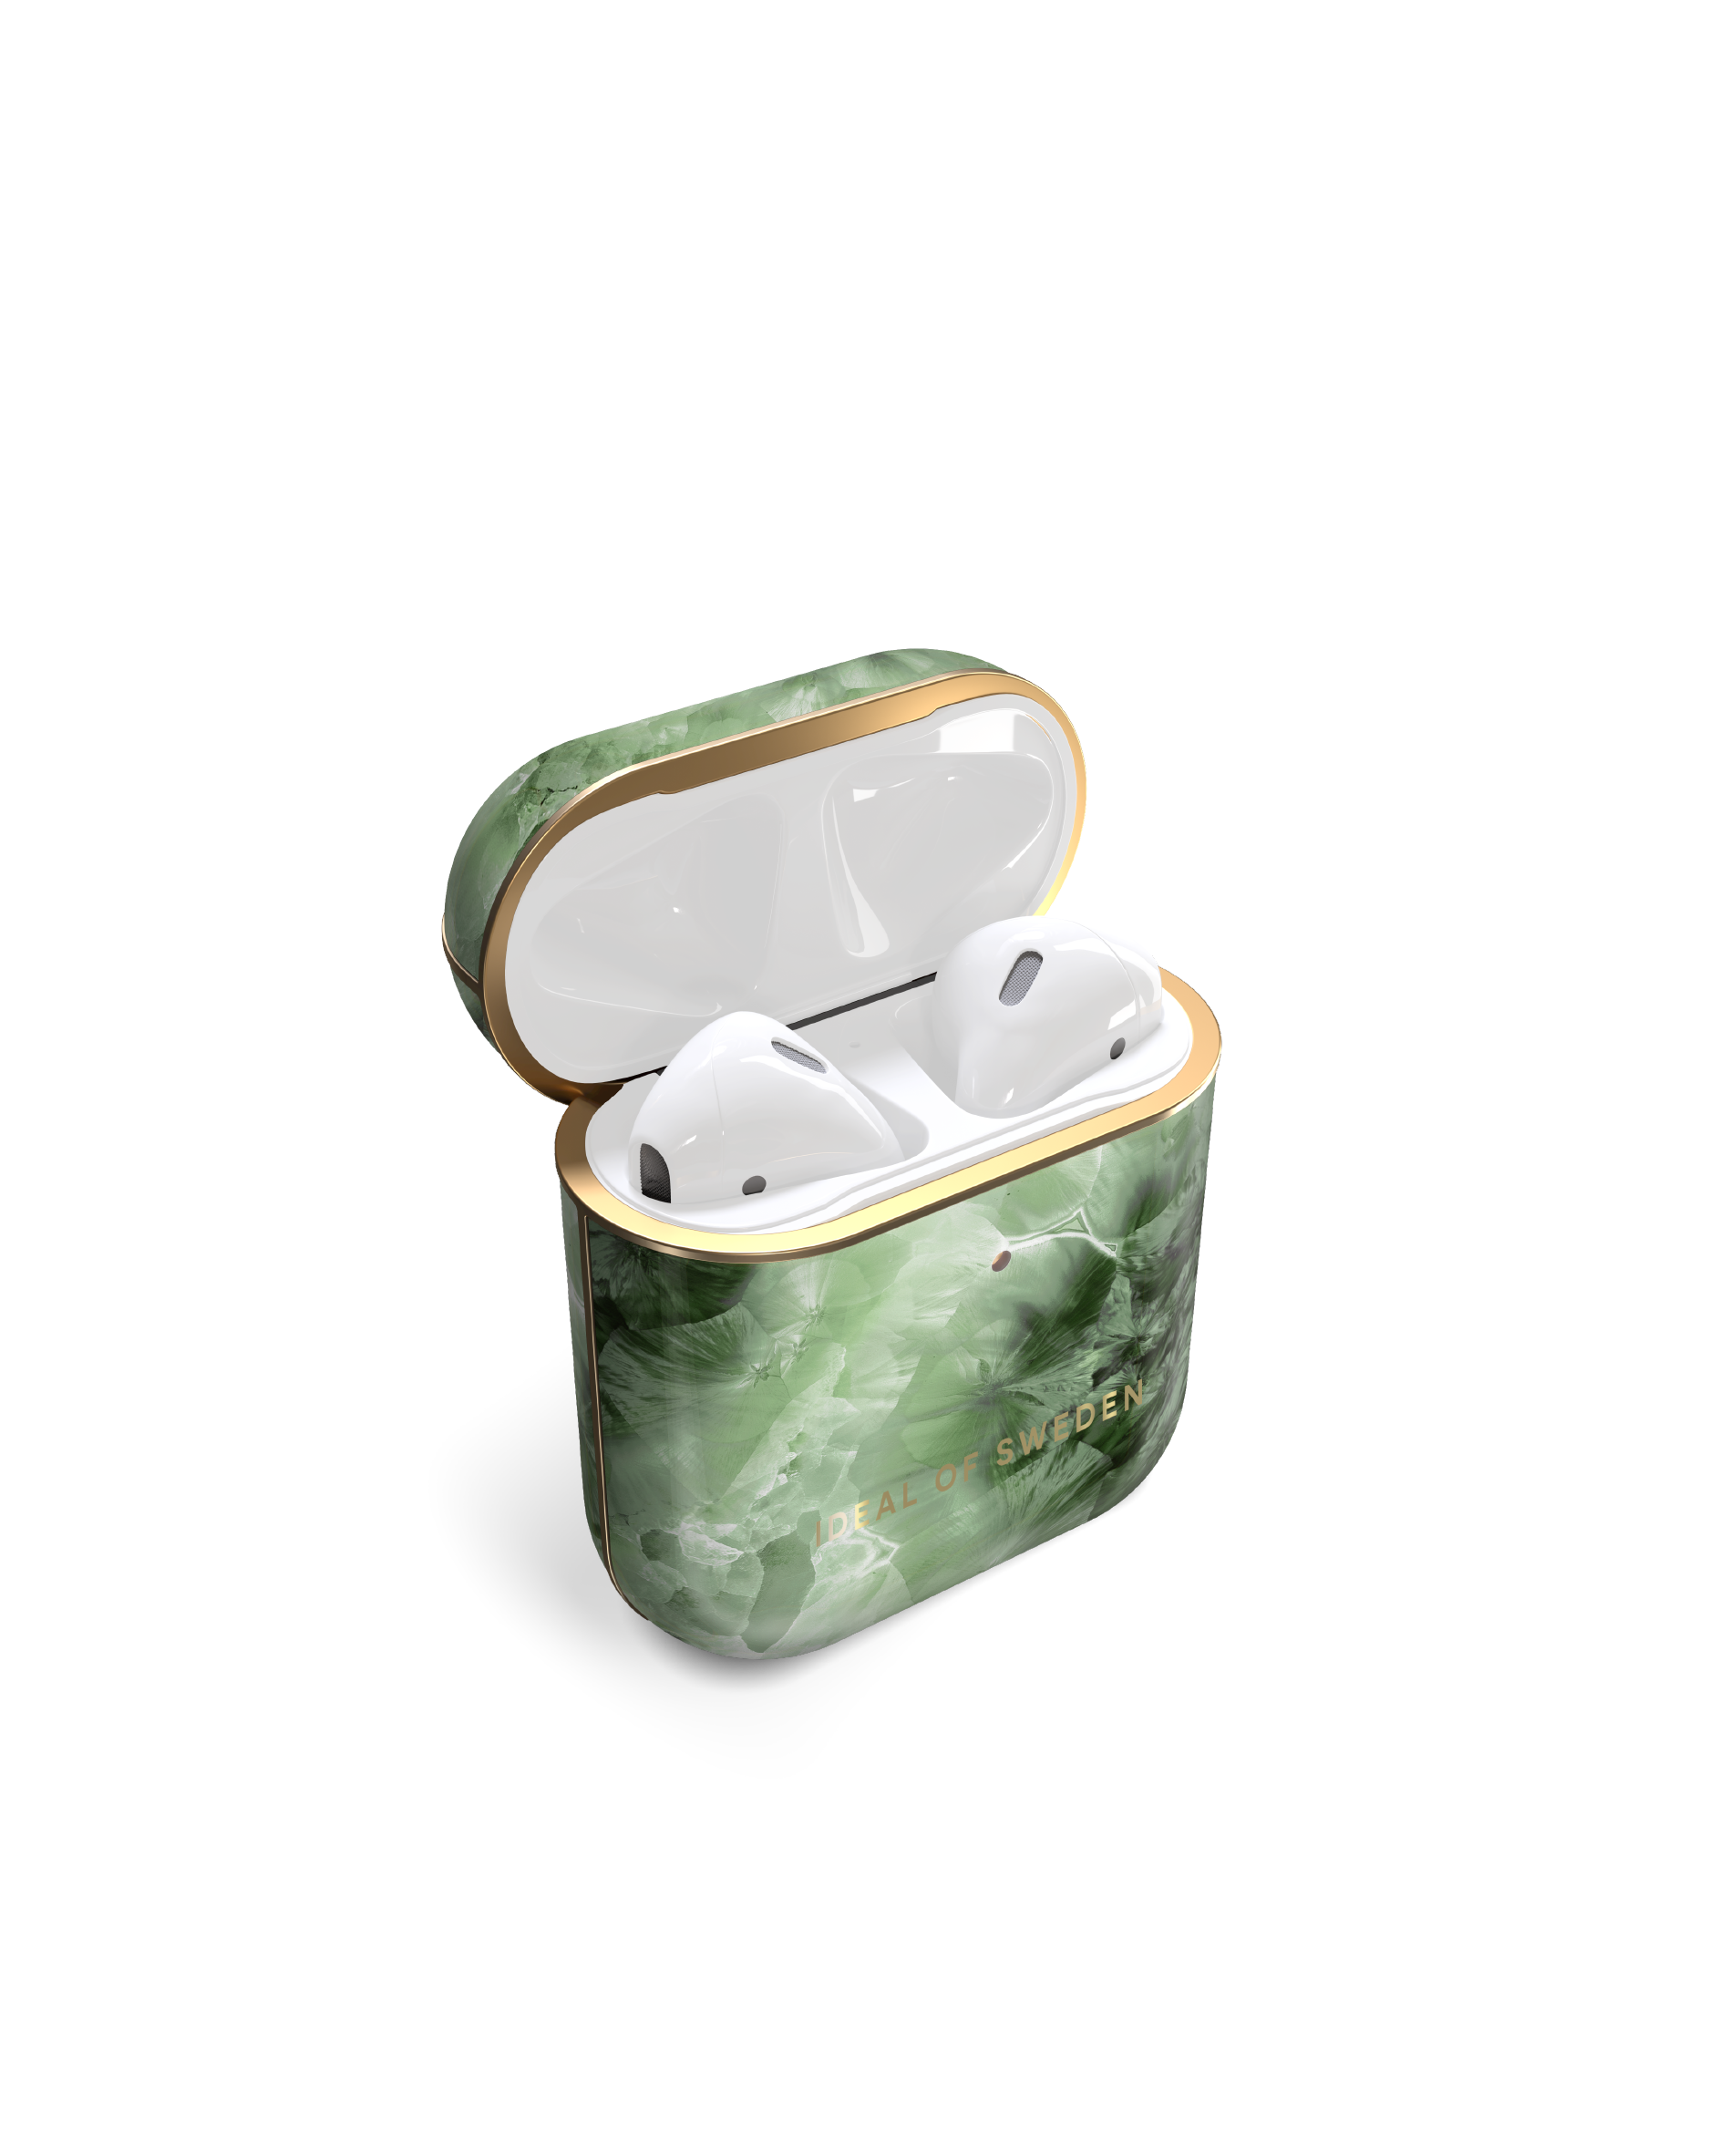 SWEDEN Case passend IDFAPC-230 OF für: Green Crystal Sky AirPod Apple IDEAL Full Cover